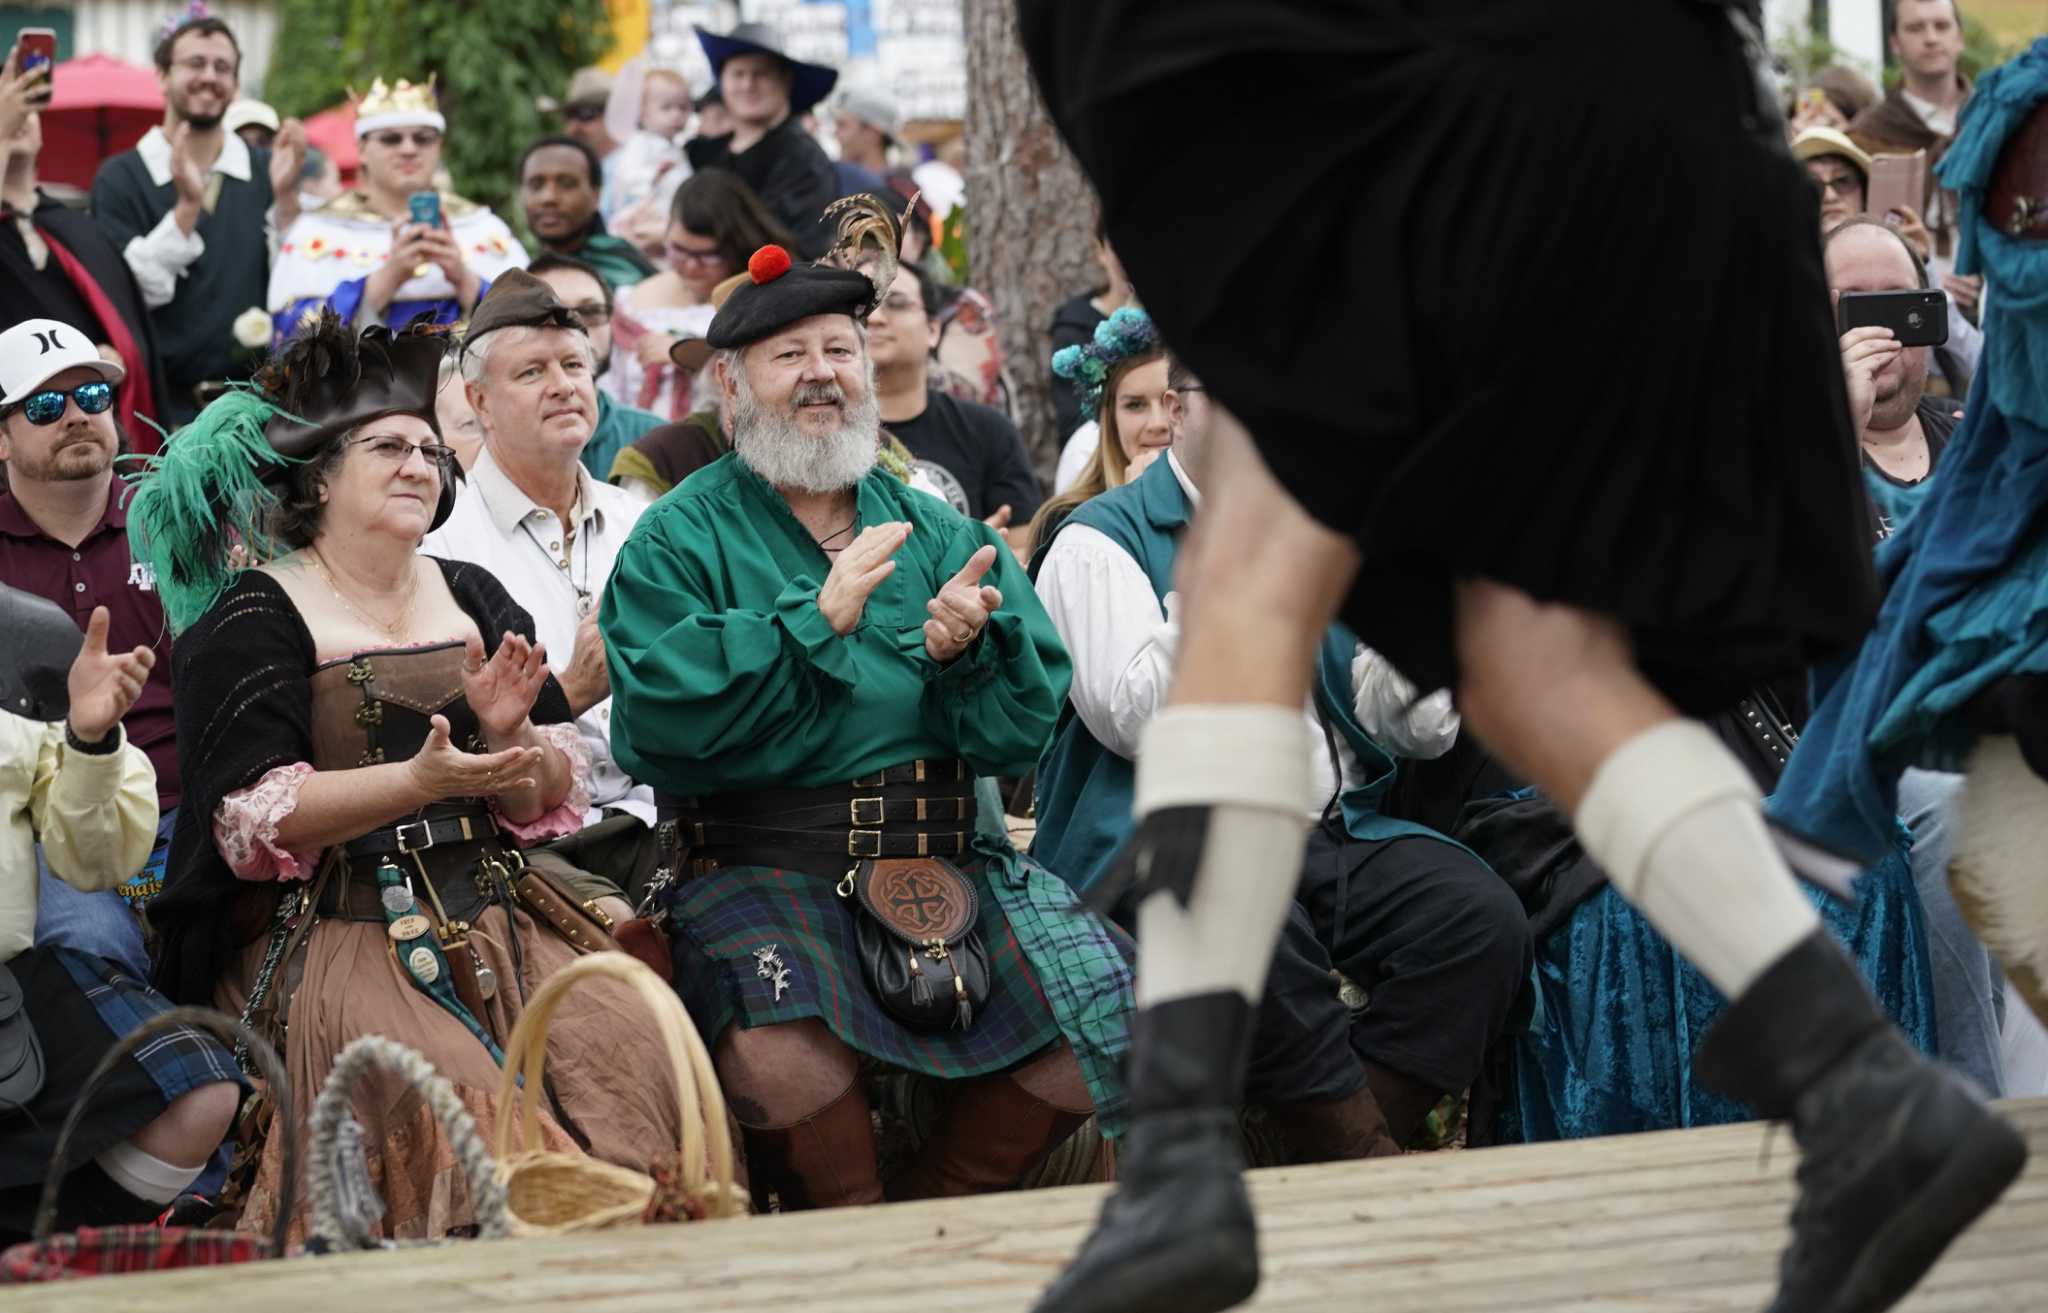 Texas Renaissance Festival goers warned not to drink well water